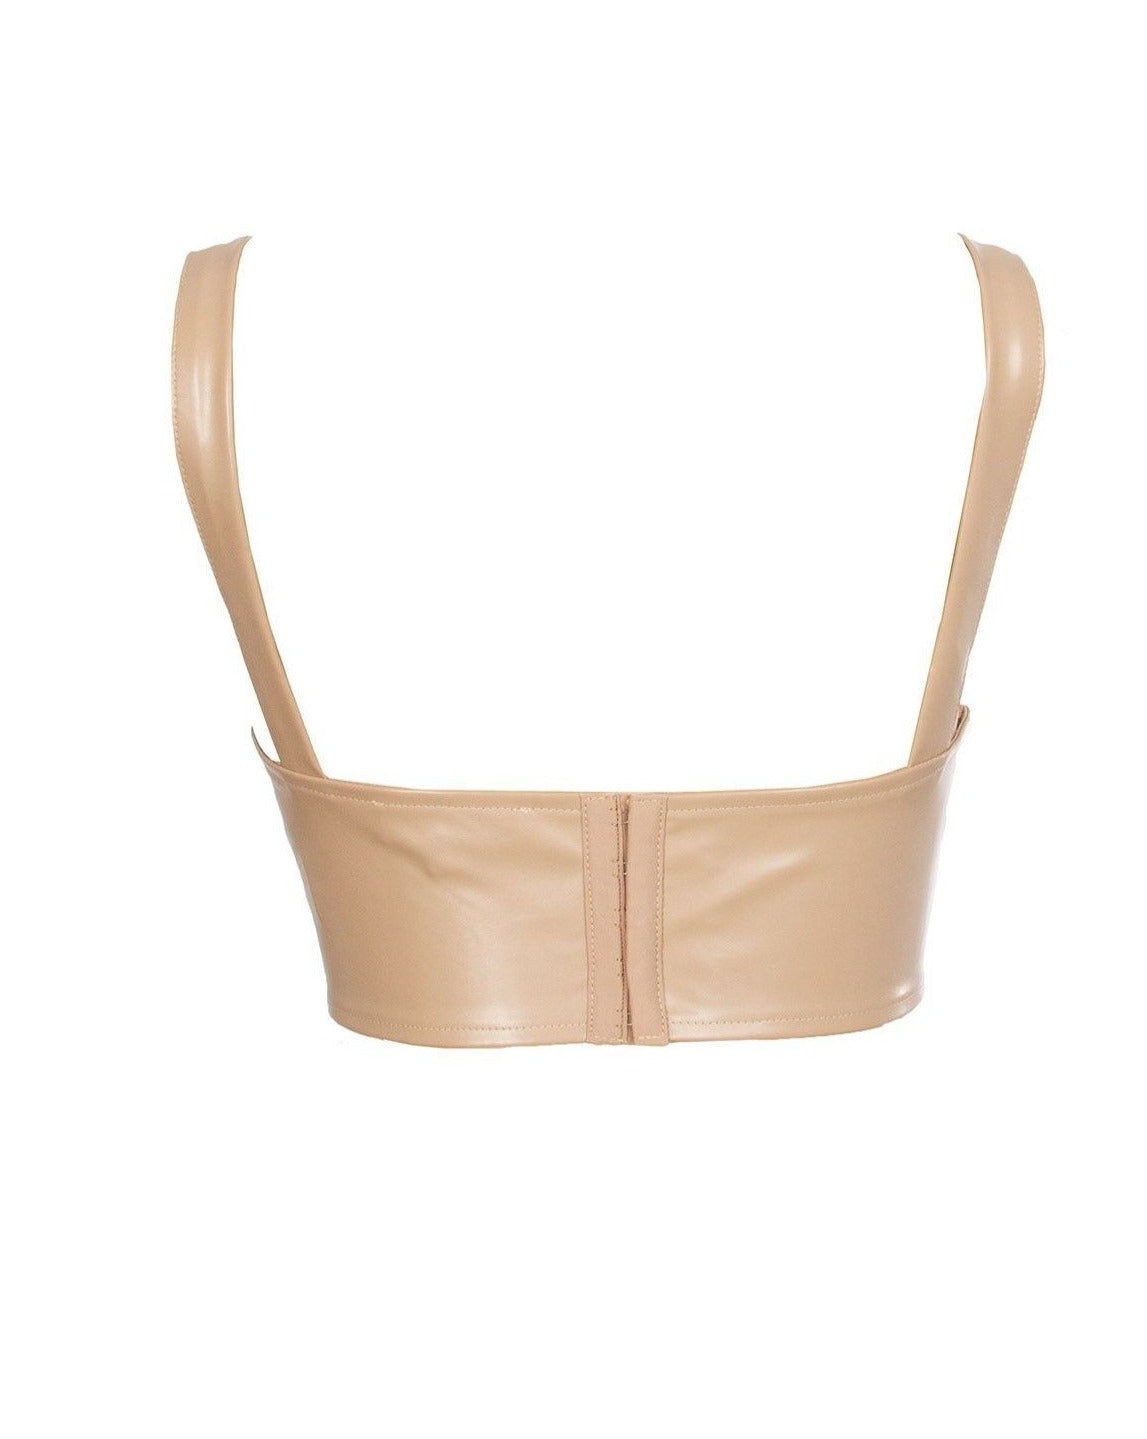 Close-up of the Liv Taupe Leather Corset Crop Top, highlighting its quality materials and sophisticated design.